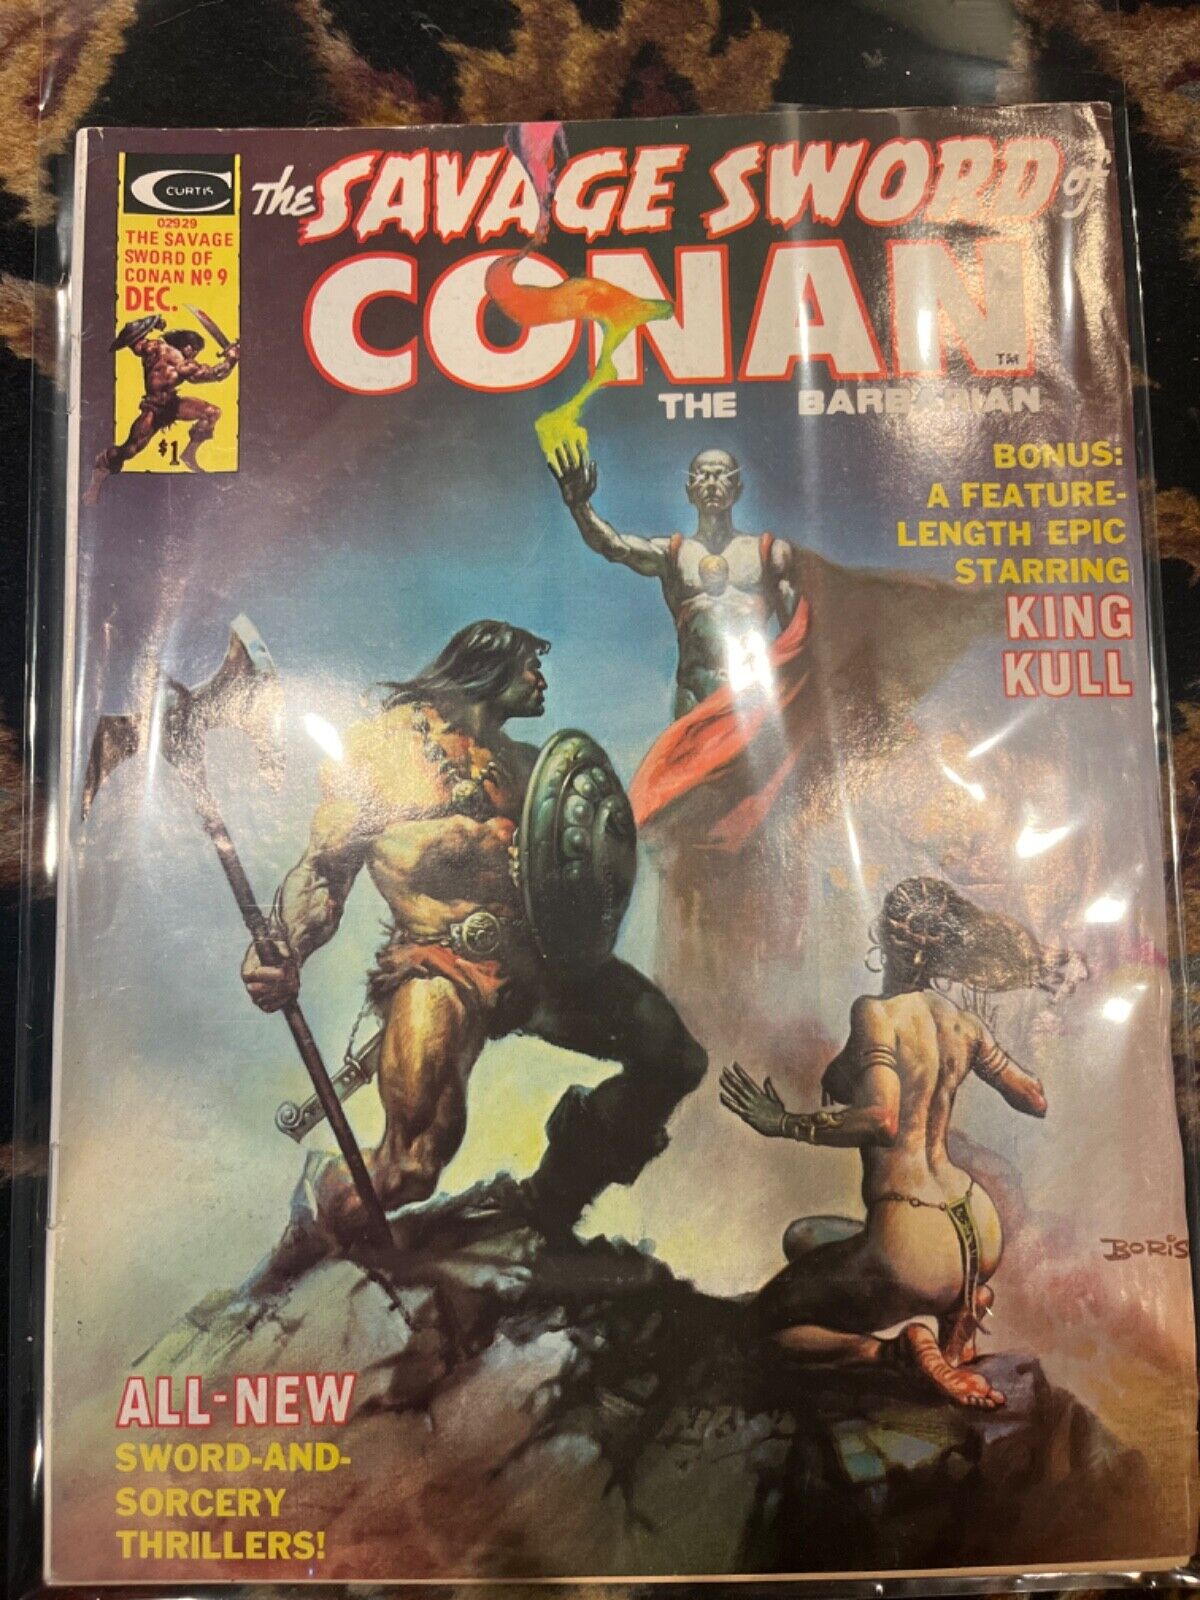 The Savage Sword of Conan The Barbarian #9 1975 Marvel